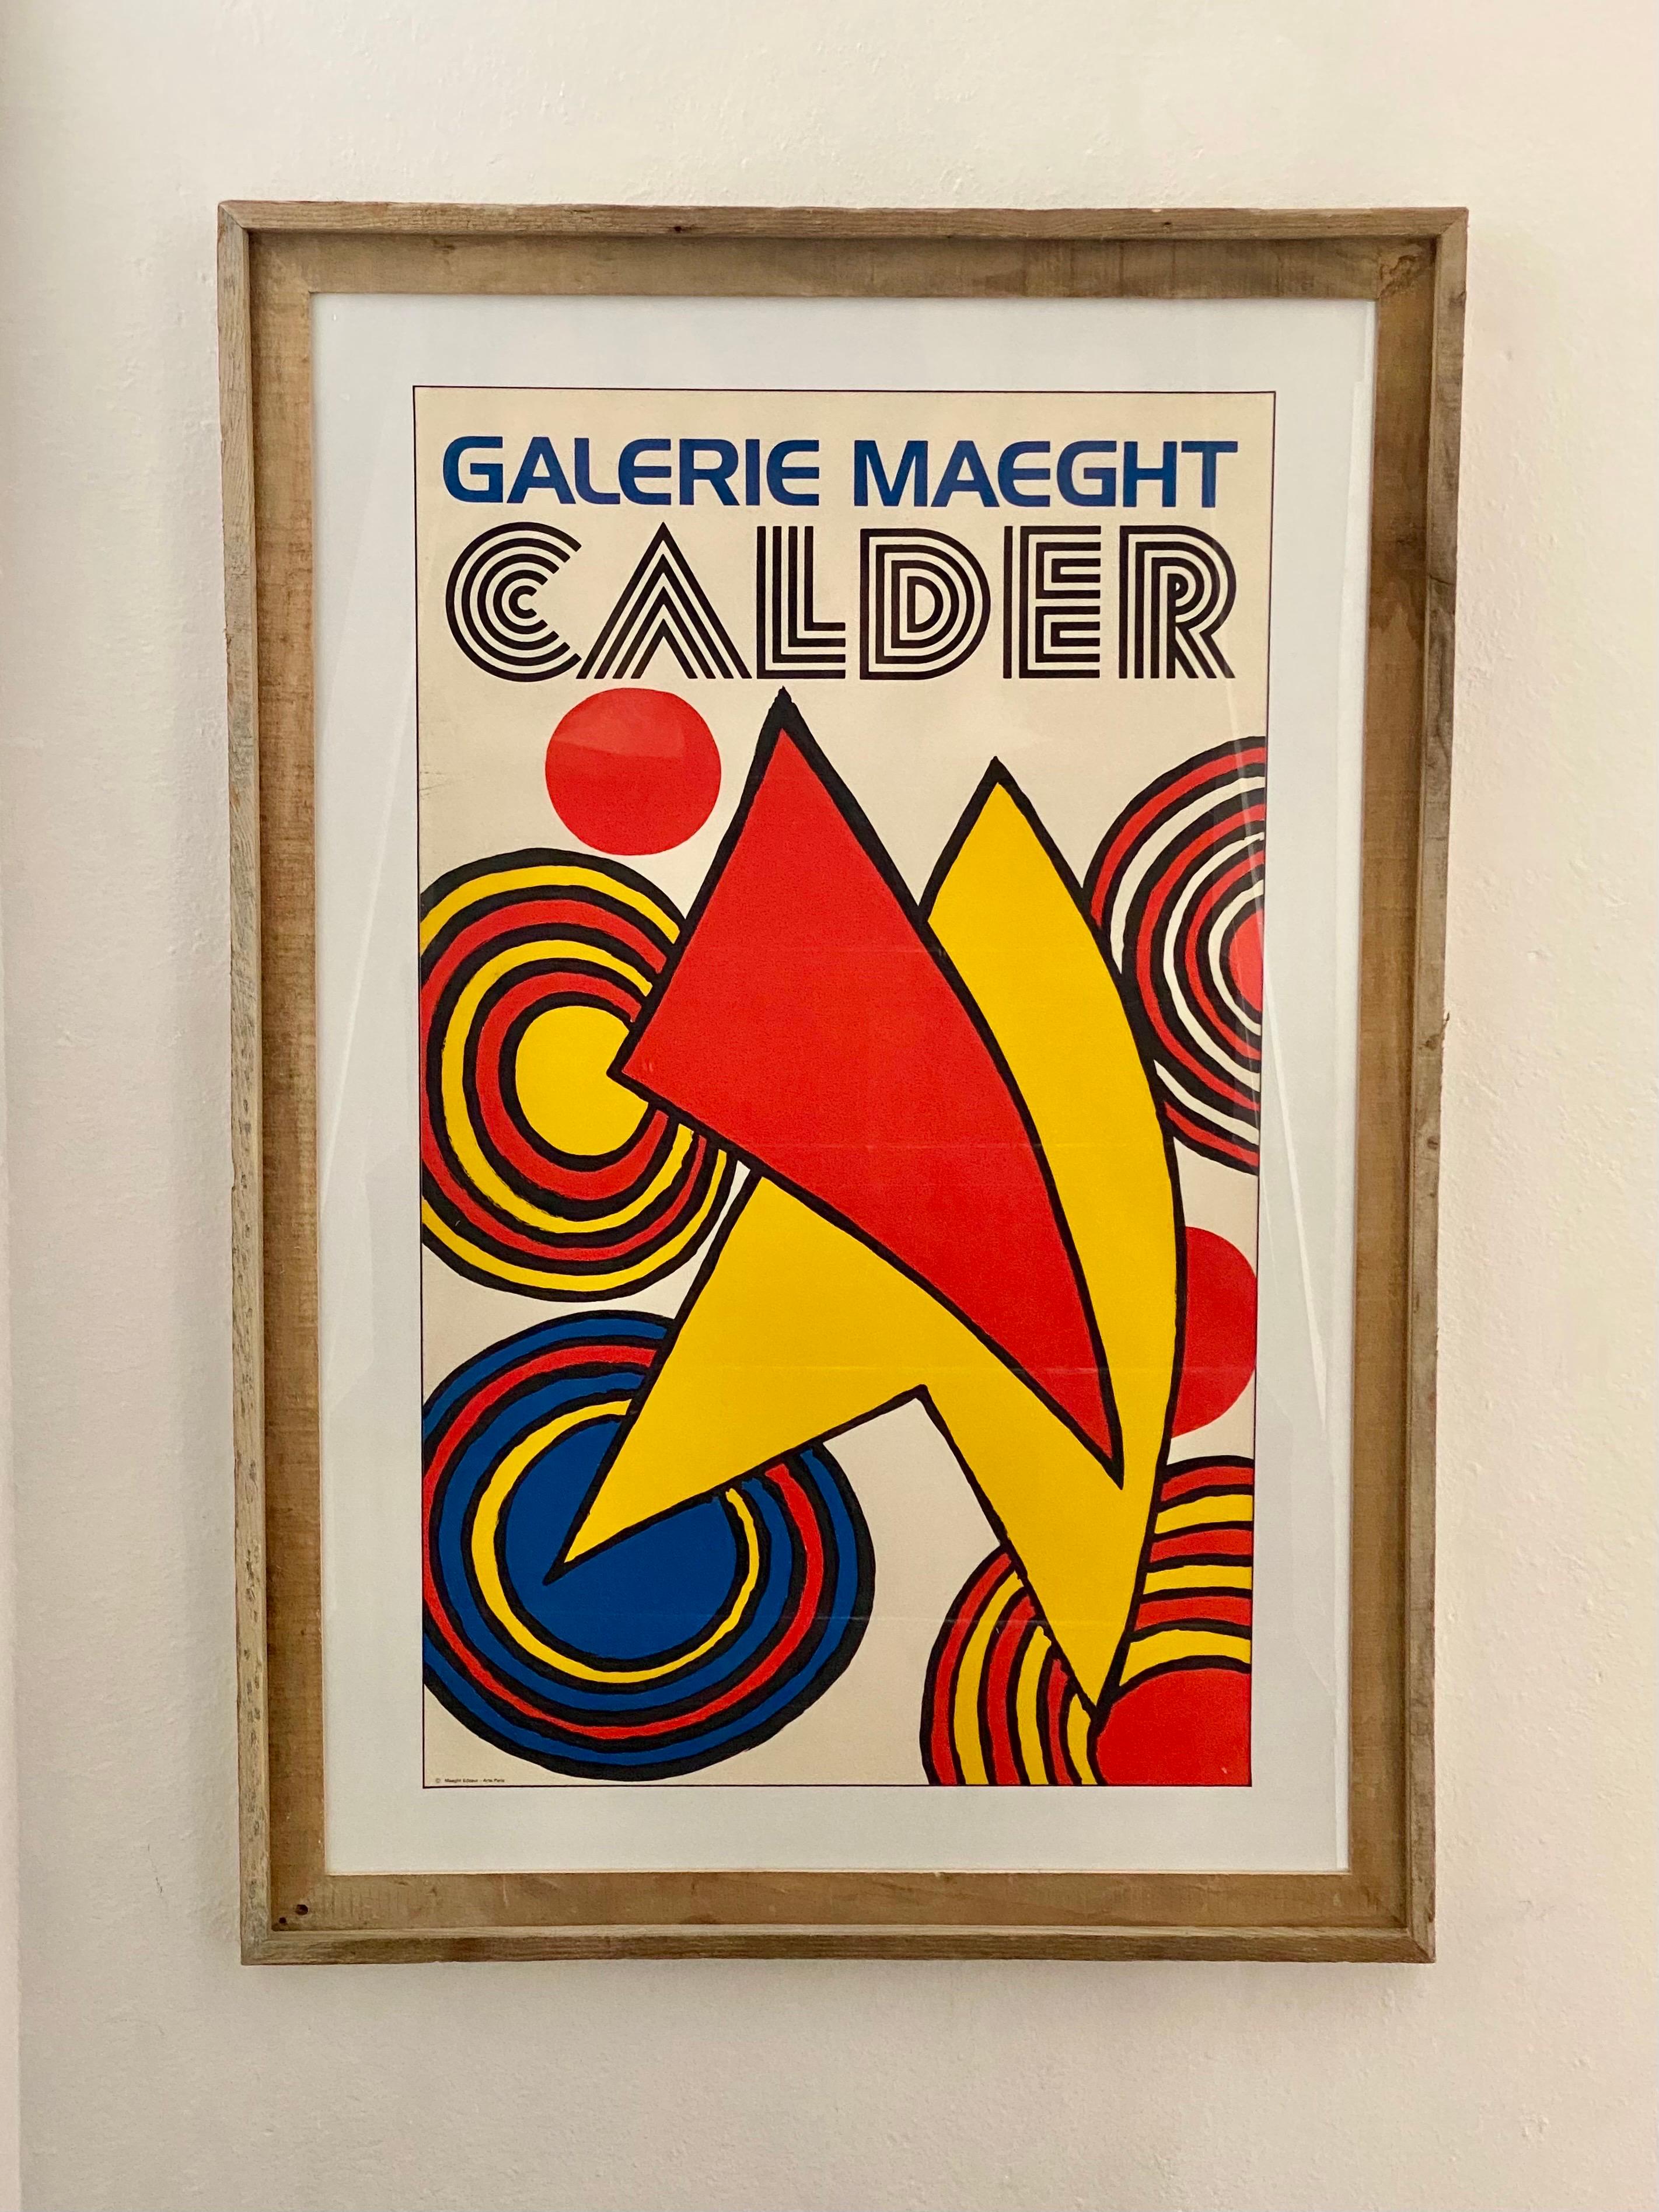 Late 20th Century Alexander Calder Galerie Maeght Framed Exhibition Poster, Limited Edition, 1970